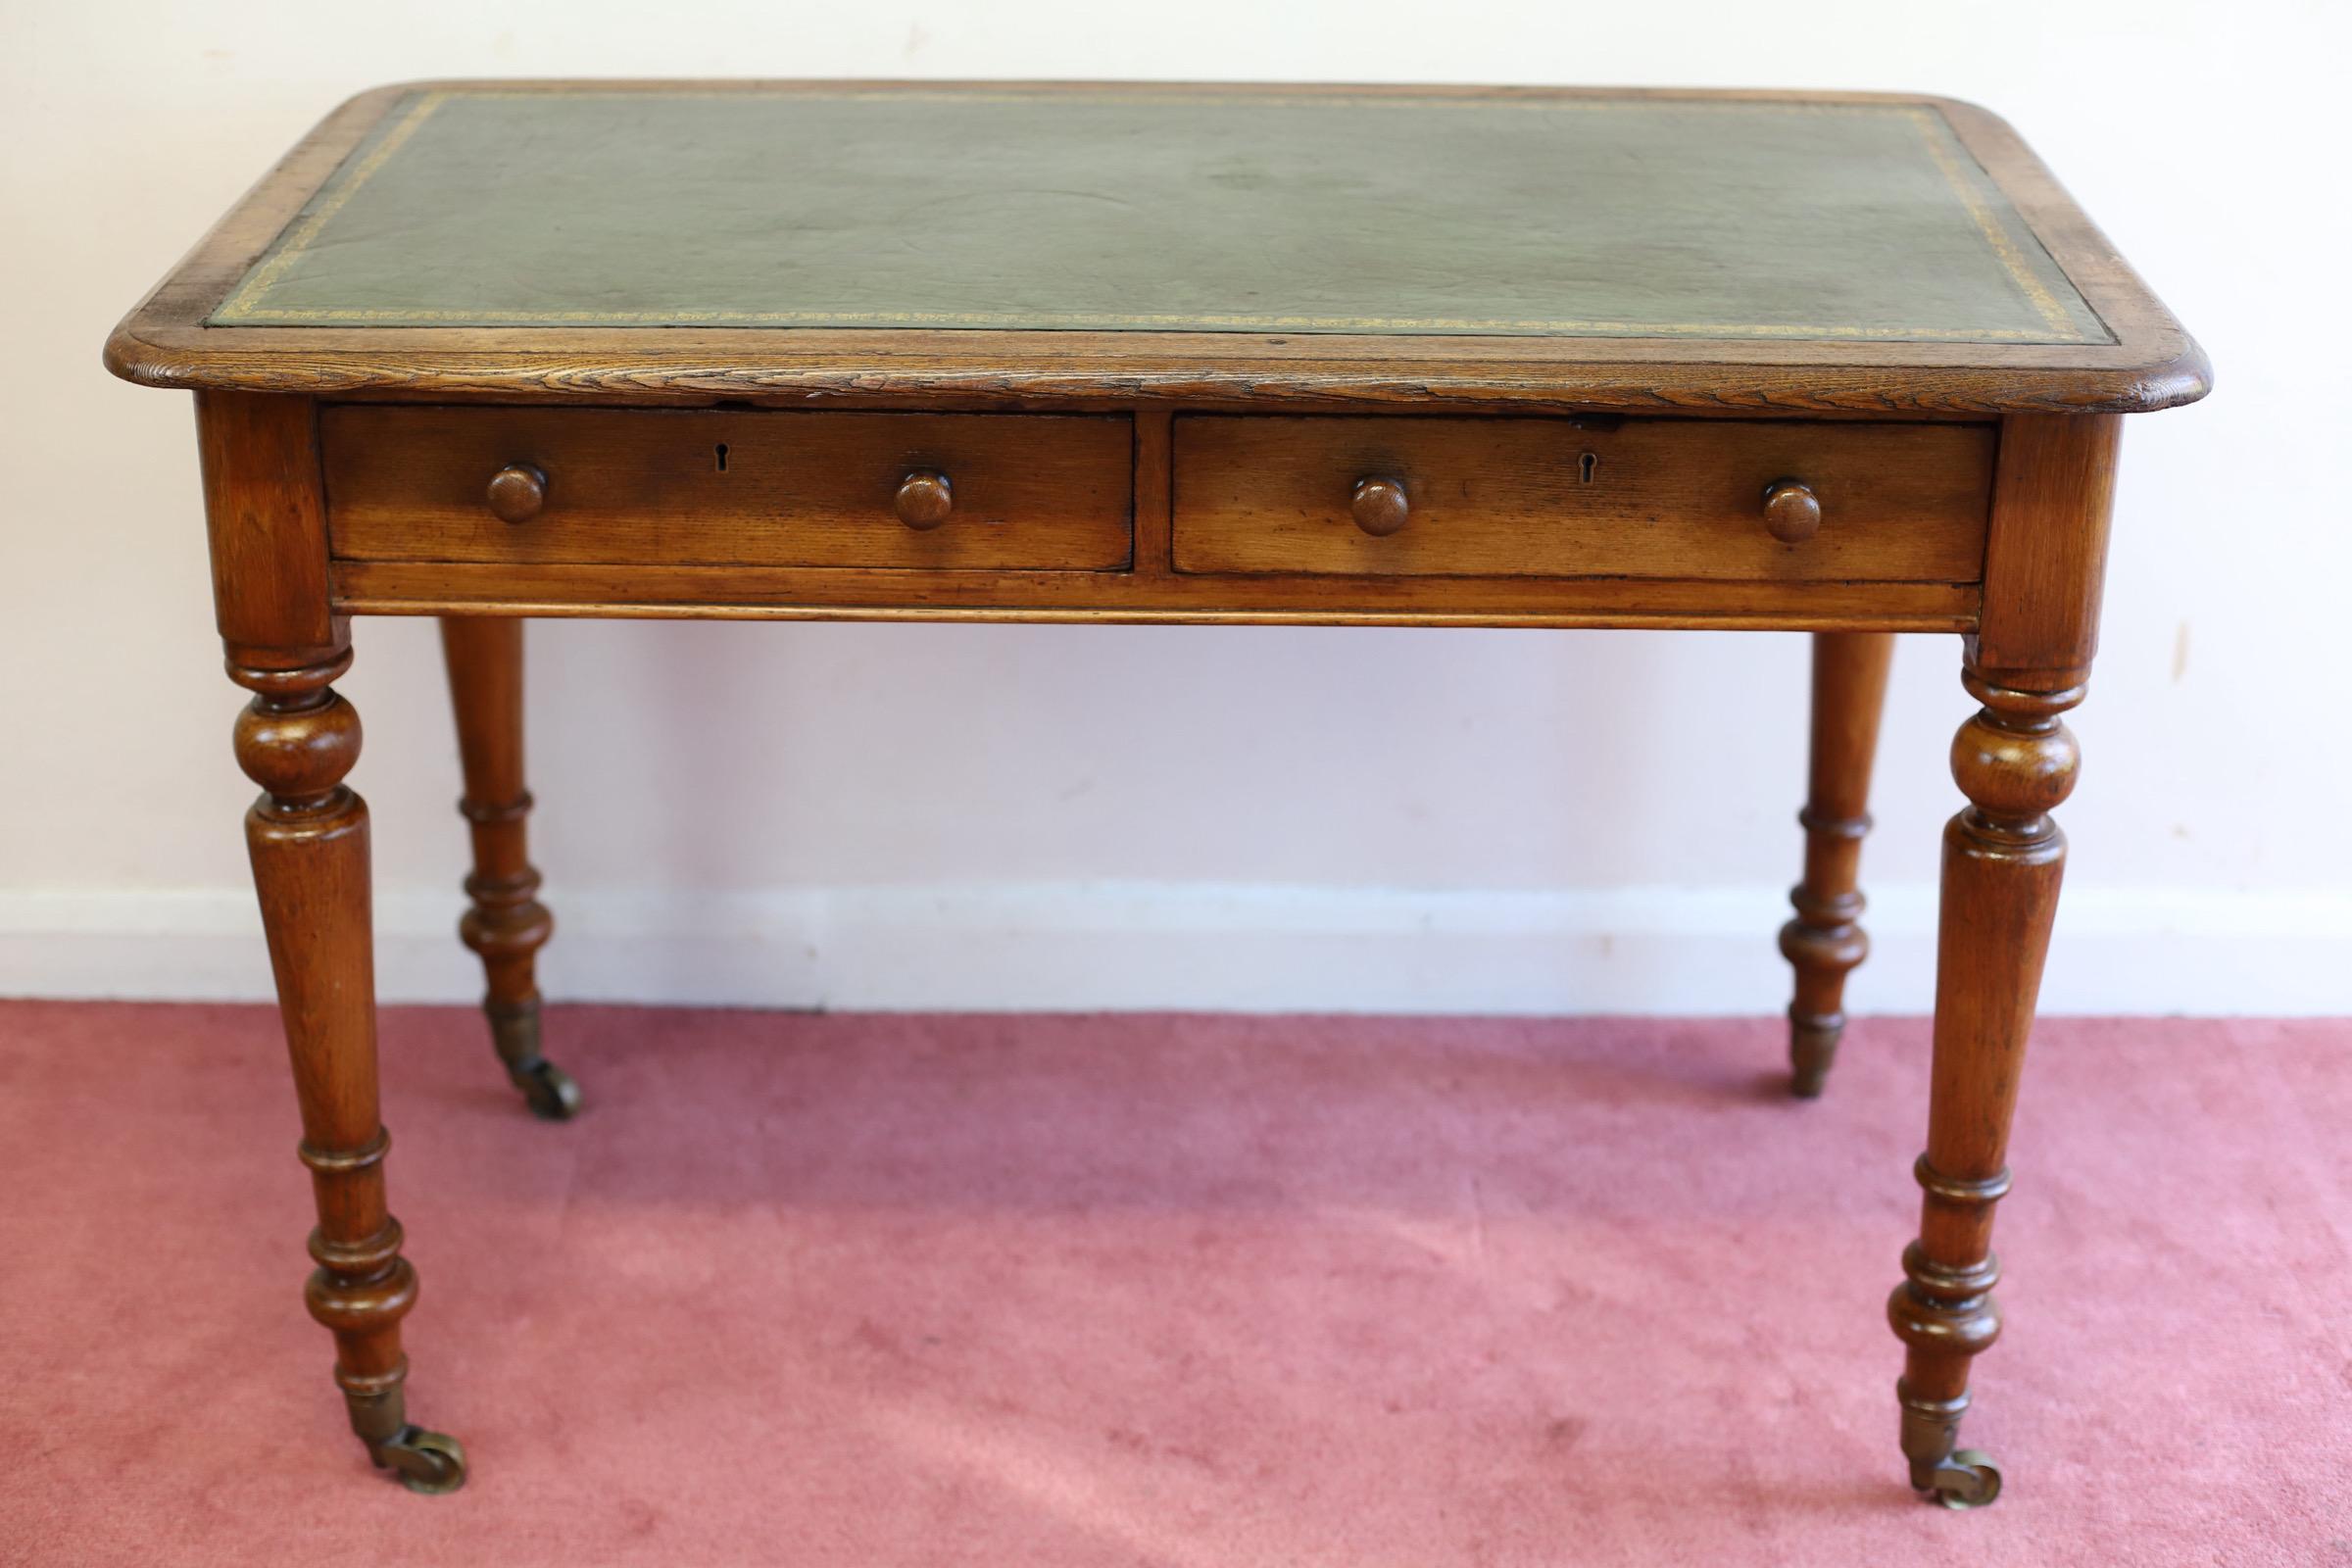 We delight to offer for sale this antique victorian oak library table, moulded top with gilt tooled leather, two drawers below with lip moulded edges and turned knobs. Raised on turned legs and brass castors.
Circa. 1850
Don't hesitate to contact me